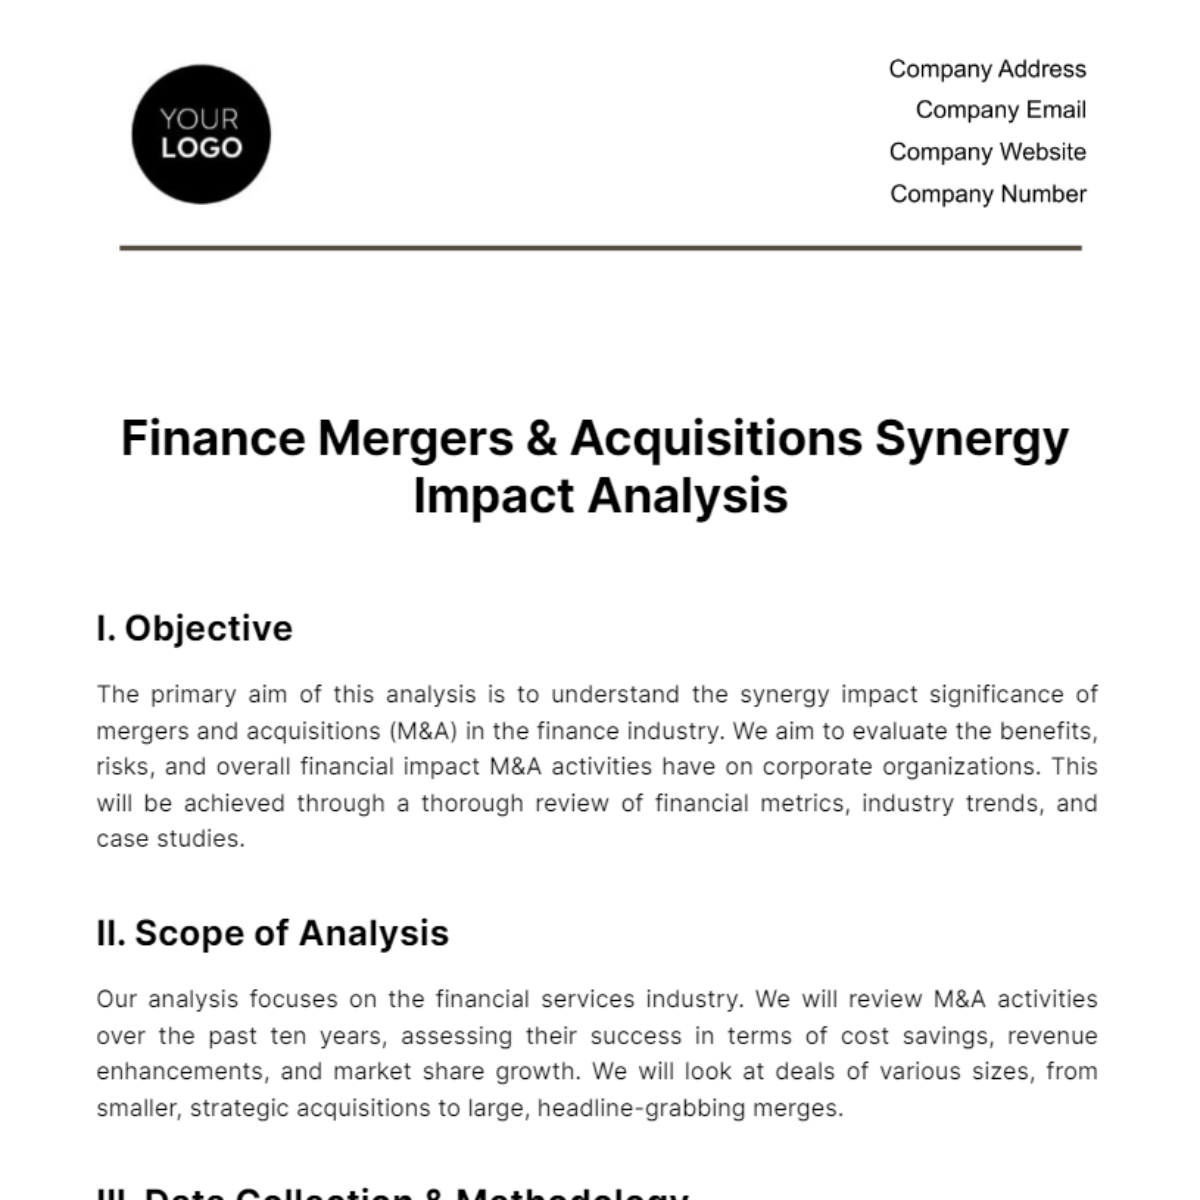 Finance Mergers & Acquisitions Synergy Impact Analysis Template